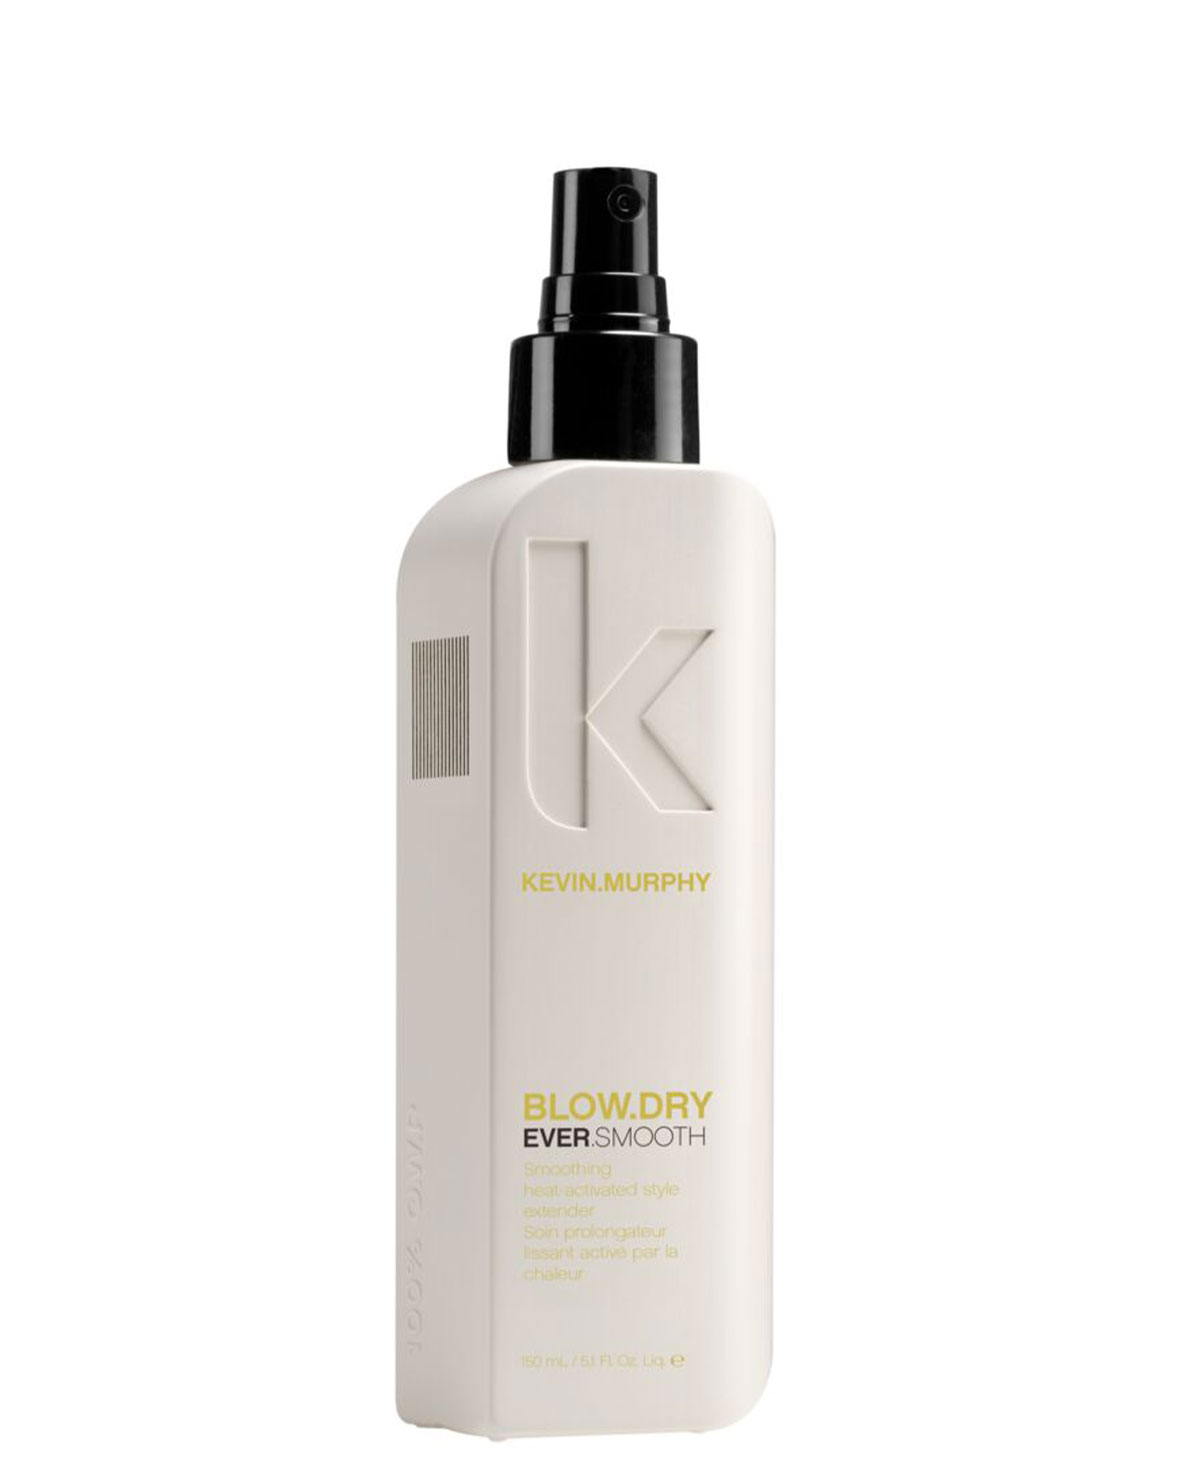 Kevin.Murphy BLOW.DRY EVER.SMOOTH 150ml